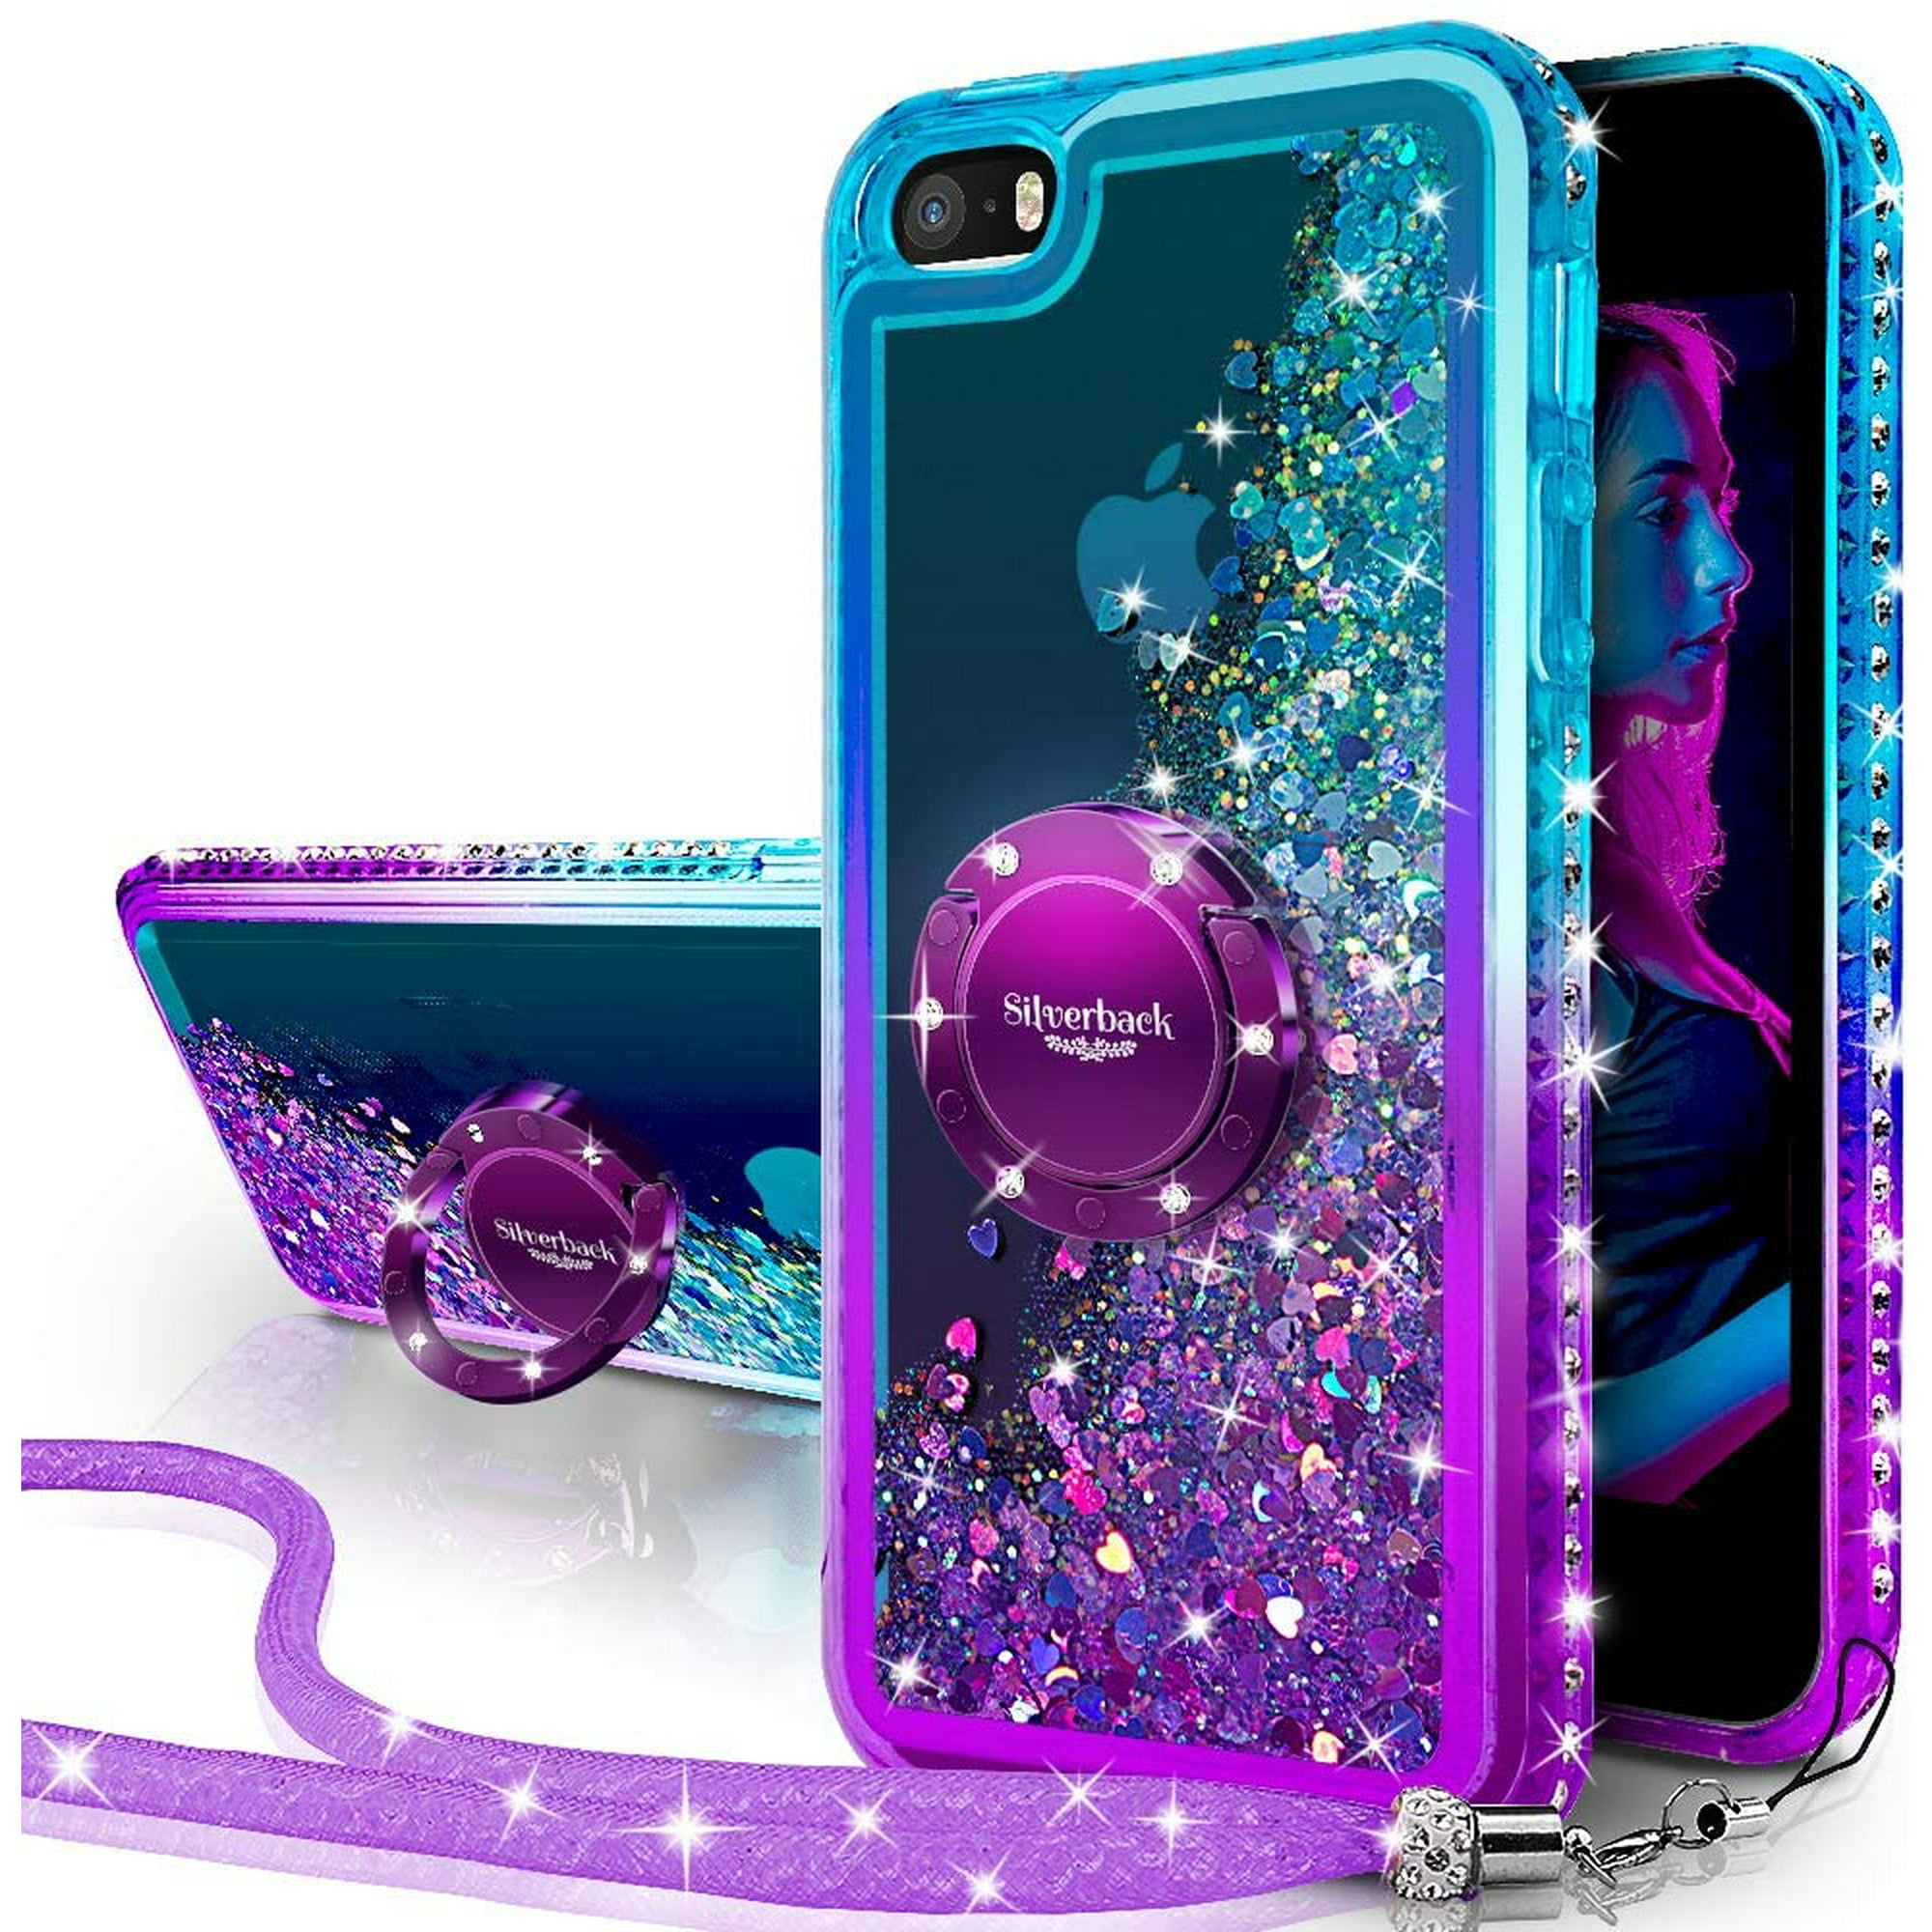 iPhone SE Case, iPhone 5S/5 Case, Silverback Moving Liquid Sparkle Glitter Case with Kickstand,Bling | Walmart Canada